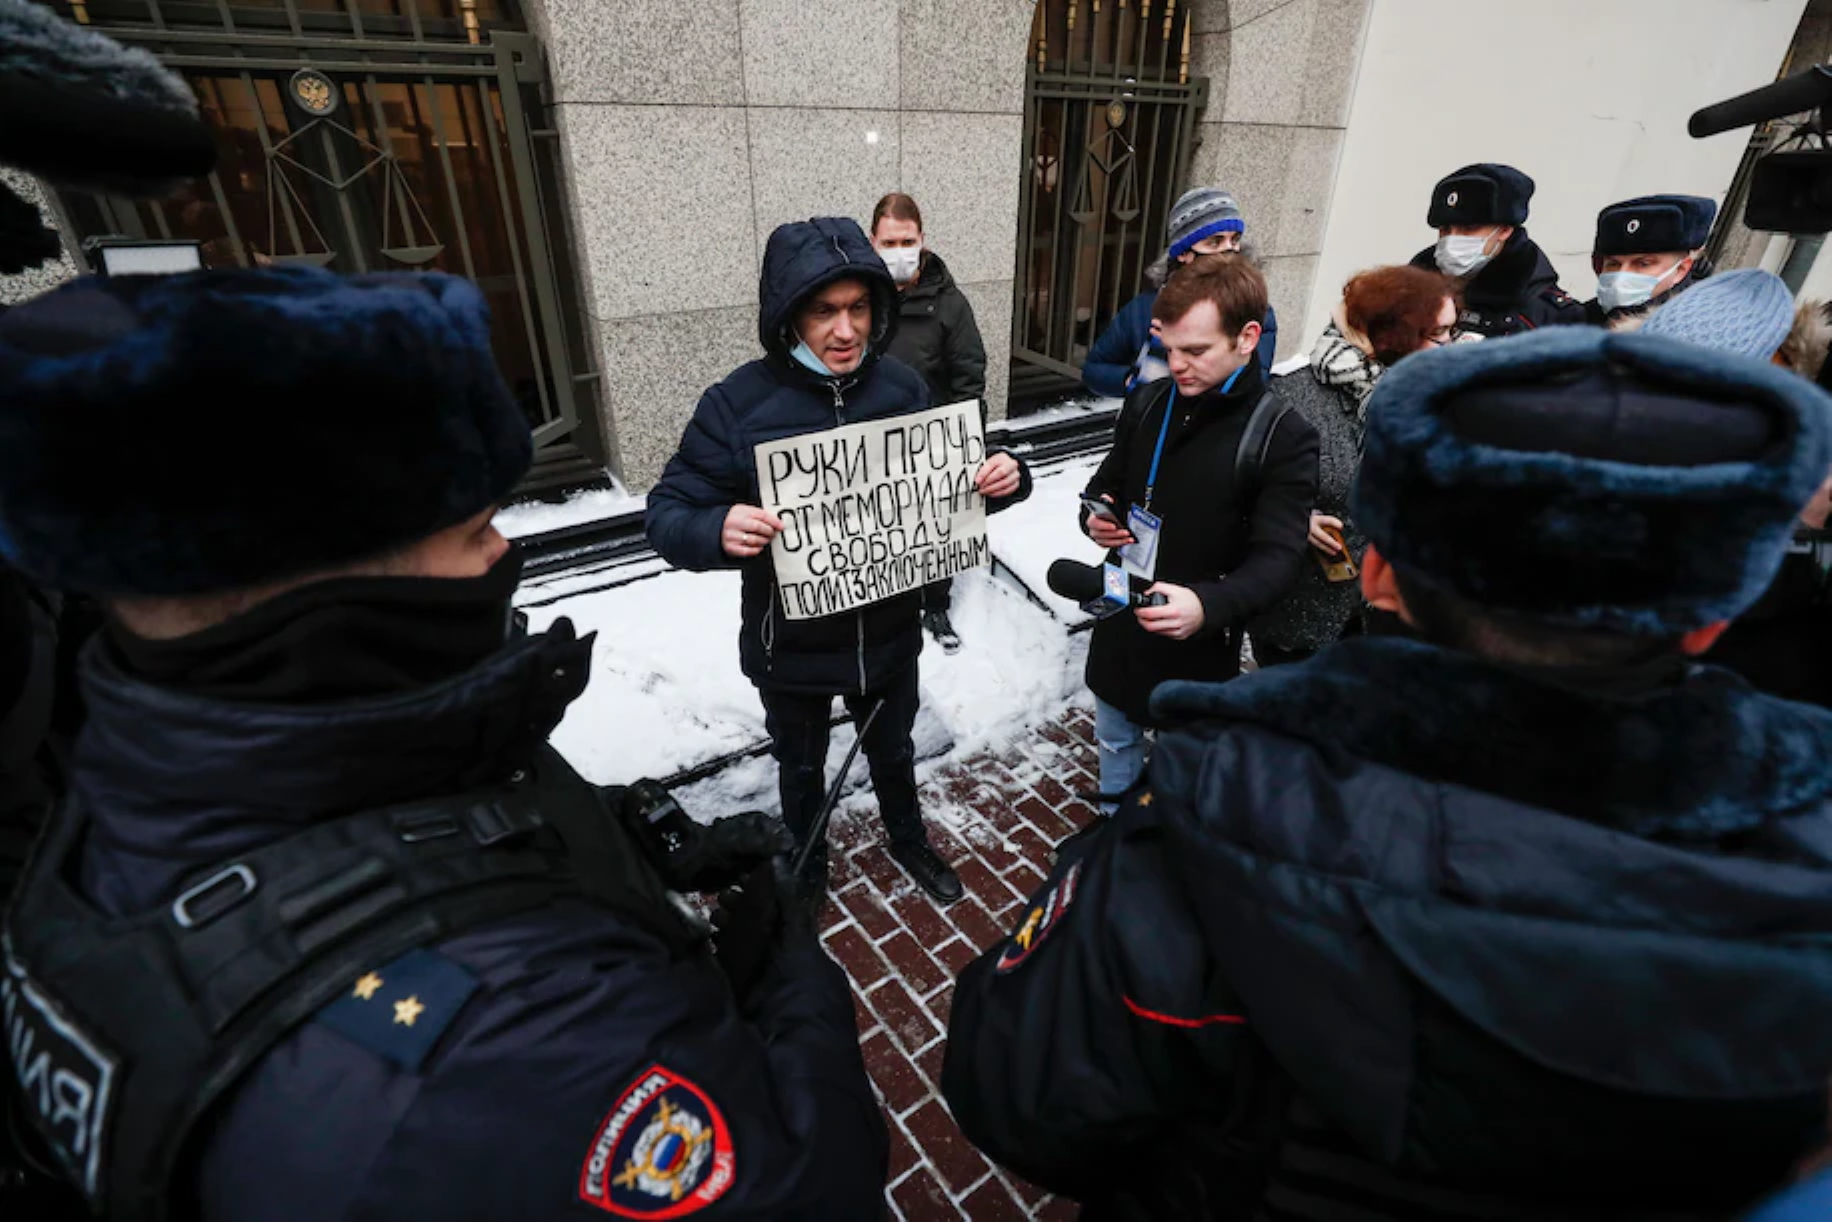 A supporter of Russia’s most prominent human rights organization, the International Memorial Society, holds a sign reading, “Hands off Memorial,” outside the Russian Supreme Court in Moscow on 28 December 2021. Russia’s Supreme Court ordered the liquidation of Memorial, in a decision that dismayed rights advocates. The ruling signaled the Kremlin’s determination to obliterate dissent, after a year in which authorities have jailed and harassed hundreds of opposition figures, activists, journalists and human rights lawyers, forcing dozens of them to flee the country. Photo: Yuri Kochetkov / EPA-EFE / Shutterstock